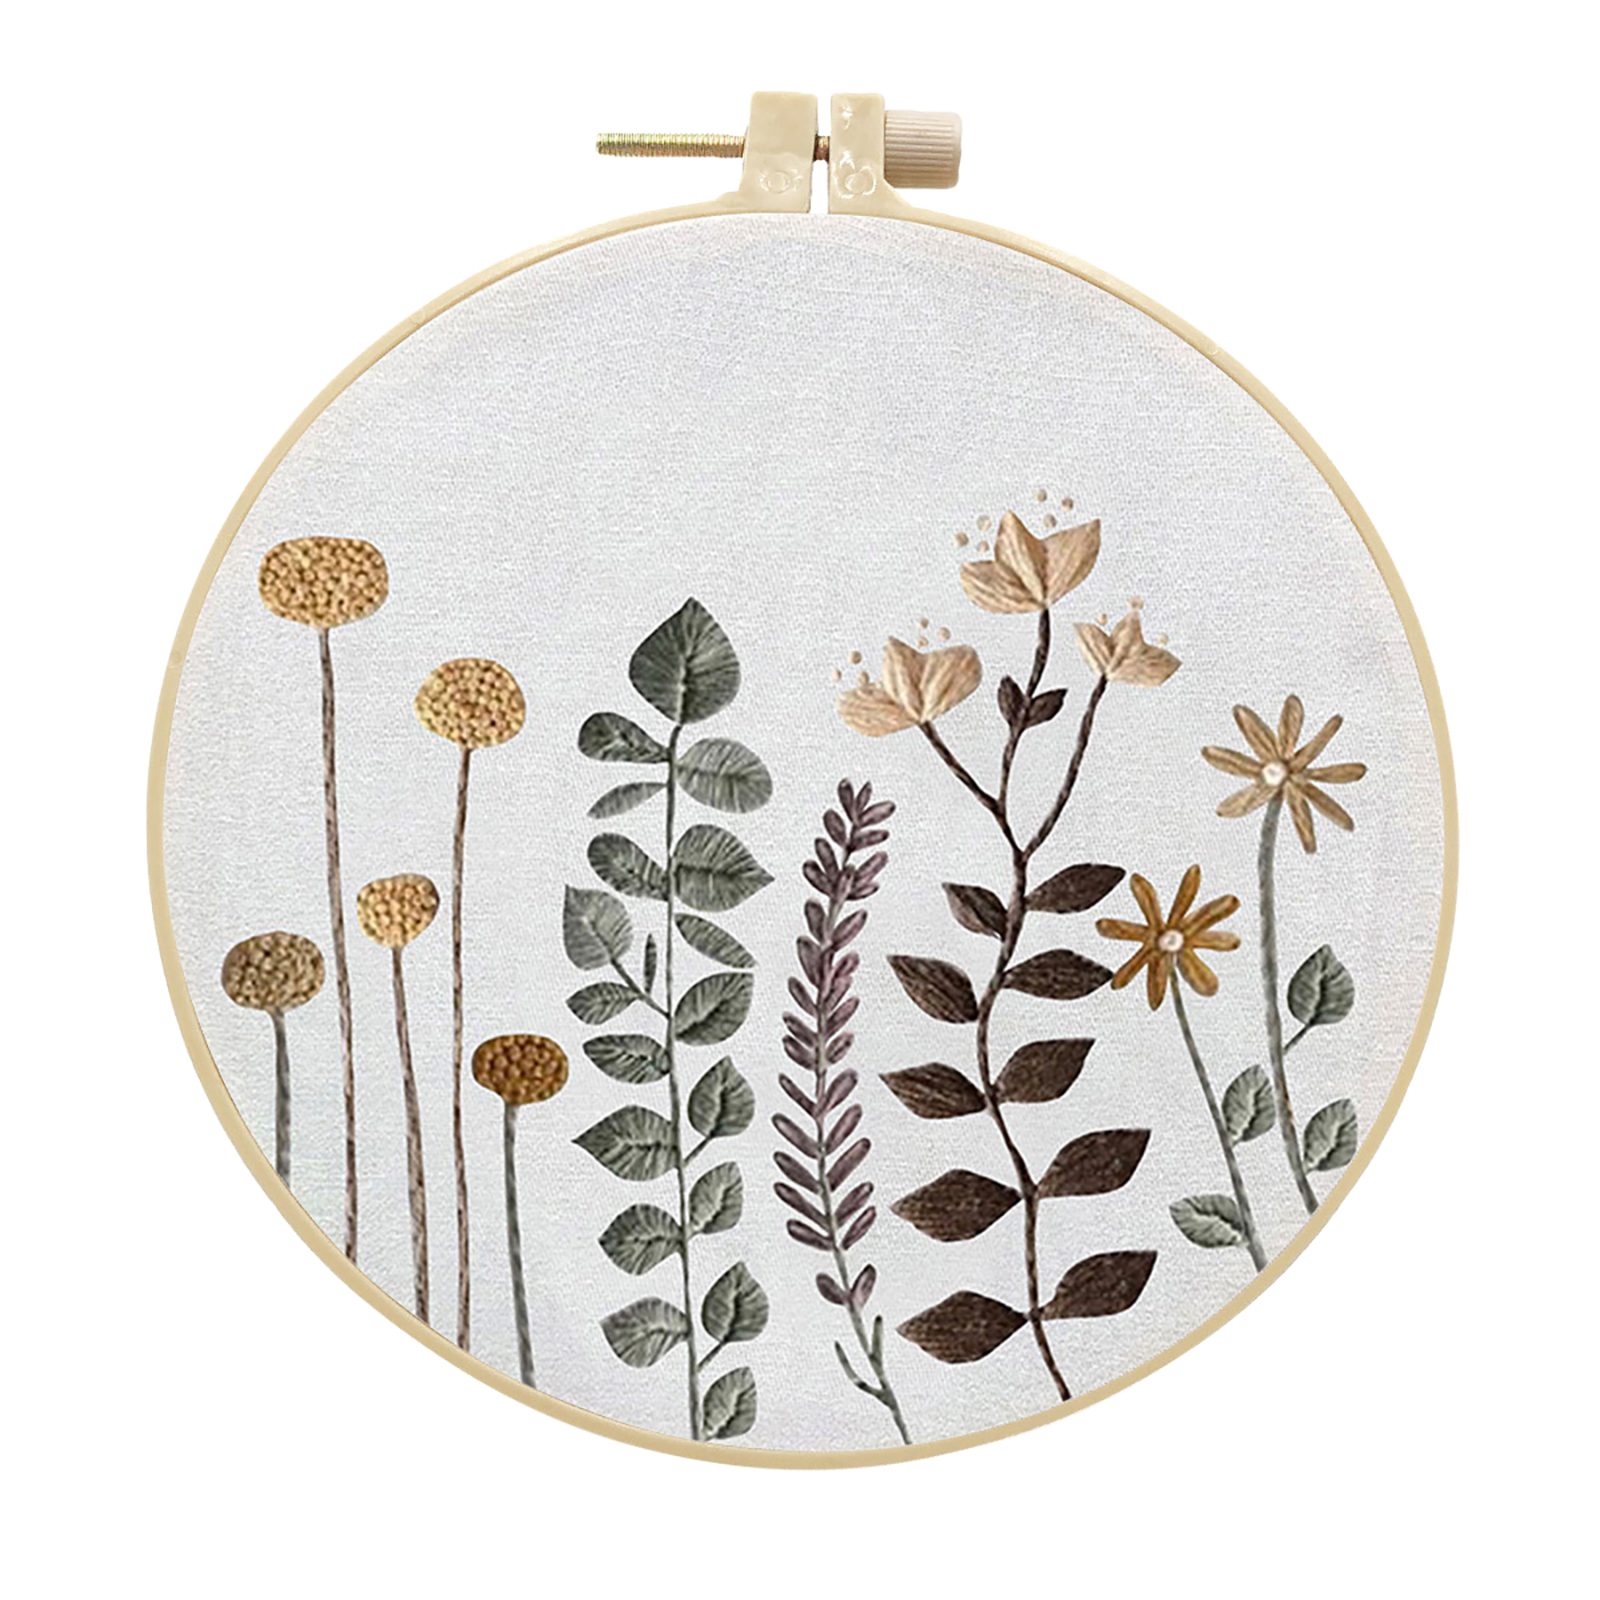 Embroidery Kits Cross stitch kits for Adult Beginner - Small wildflower Pattern